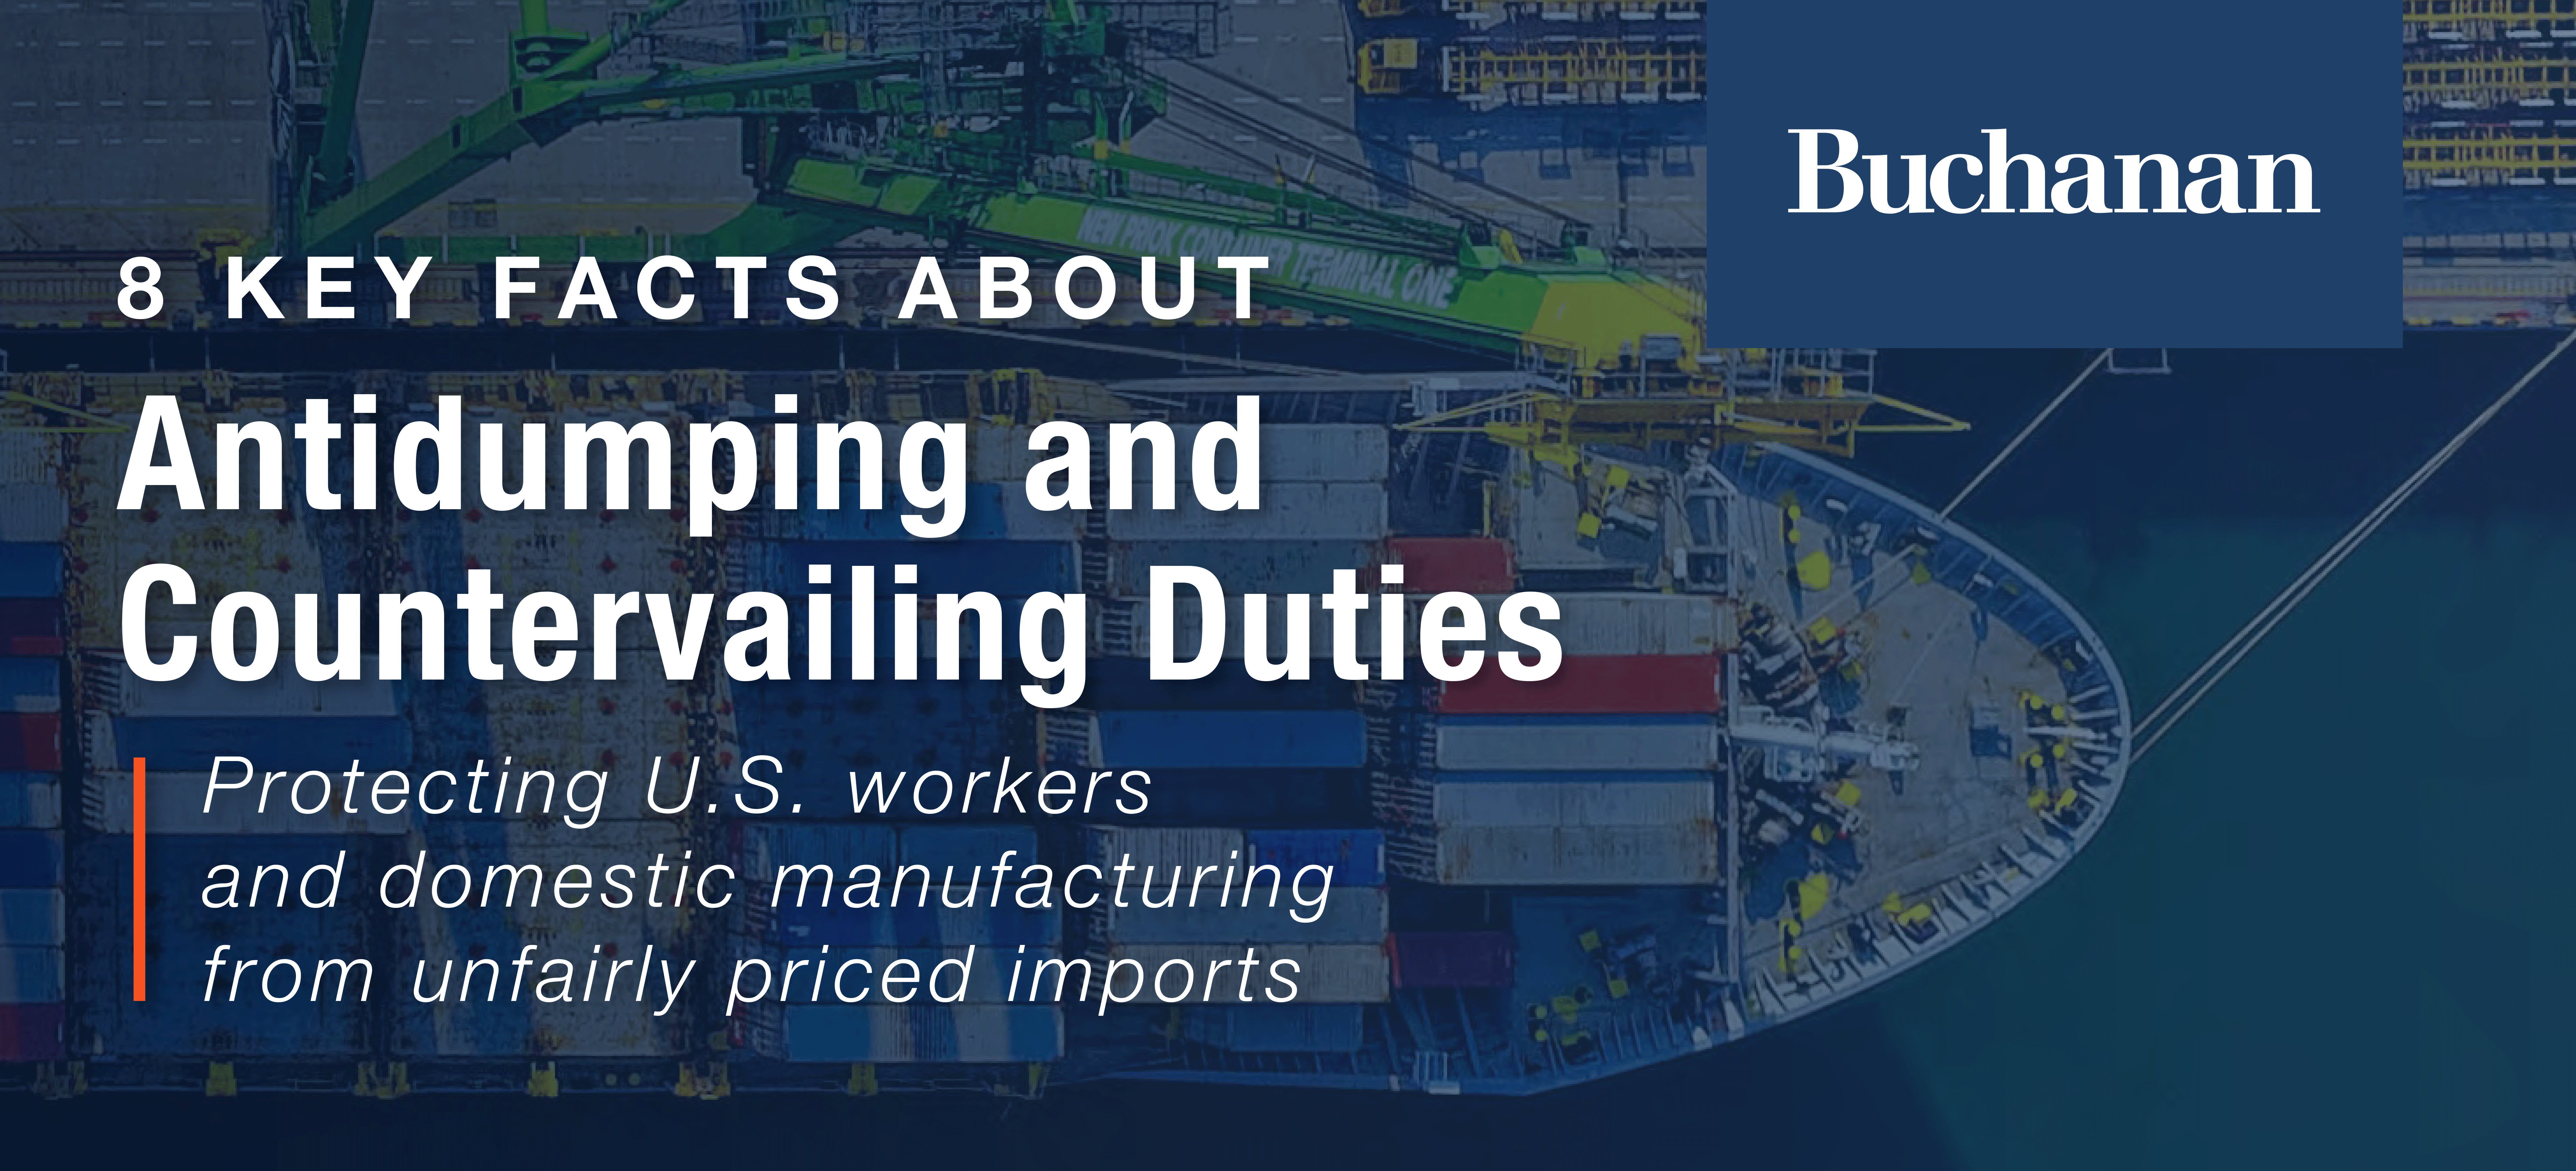 8 Key Facts About Antidumping and Countervailing Duties

Protecting U.S. workers and domestic manufacturing from unfairly priced imports.
